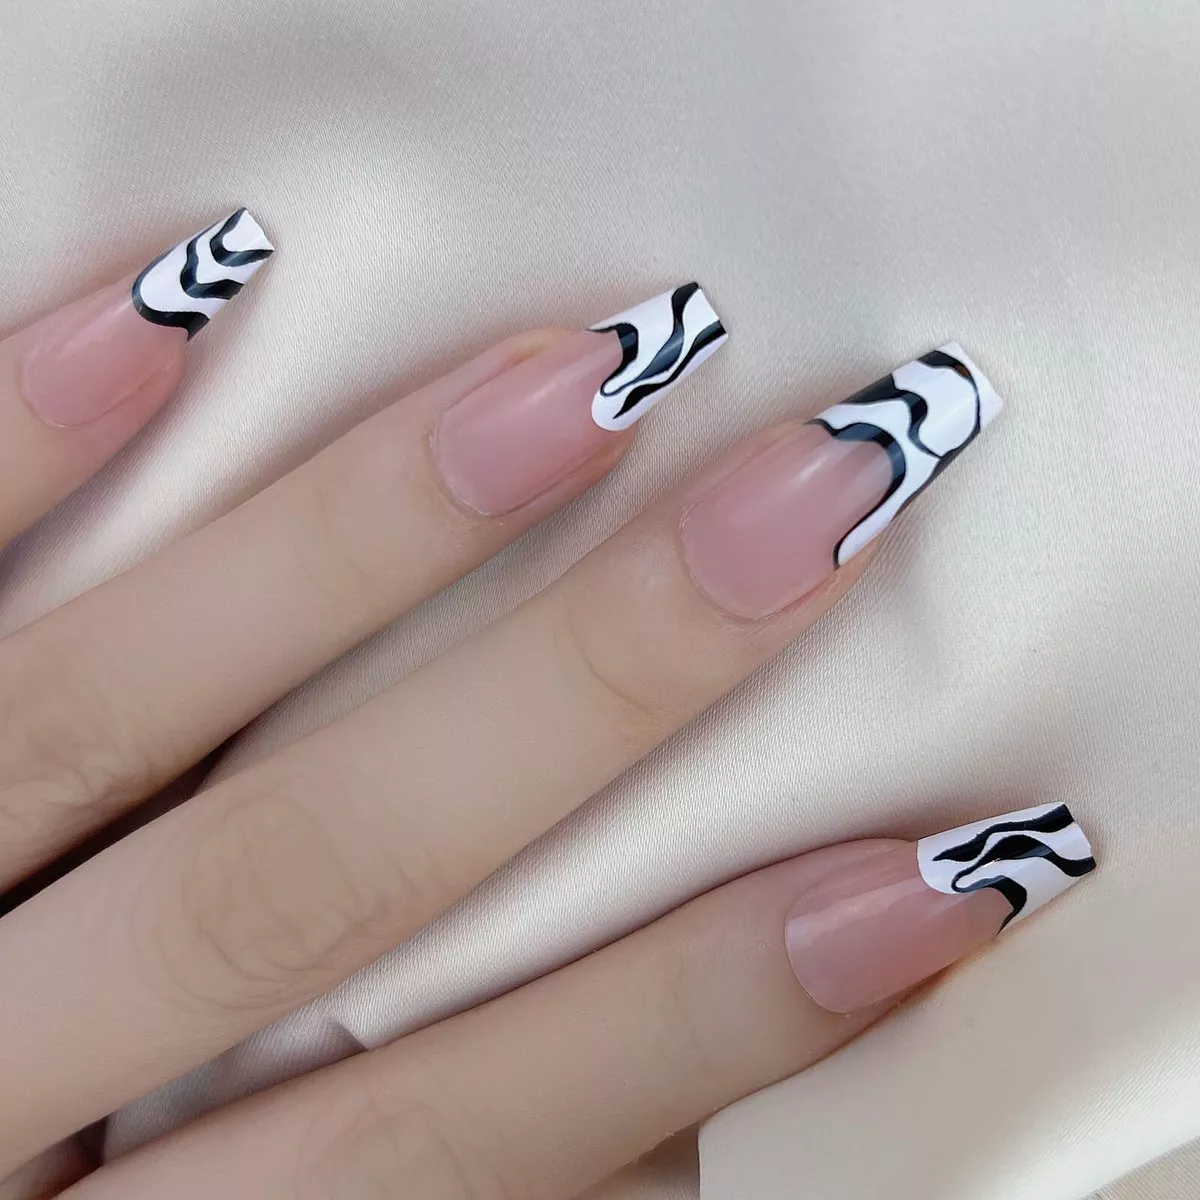 Let's talk about how different nail shapes can affect the way your nails  last ⁣ I loveeee square nails. Square shaped nails however r... | Instagram